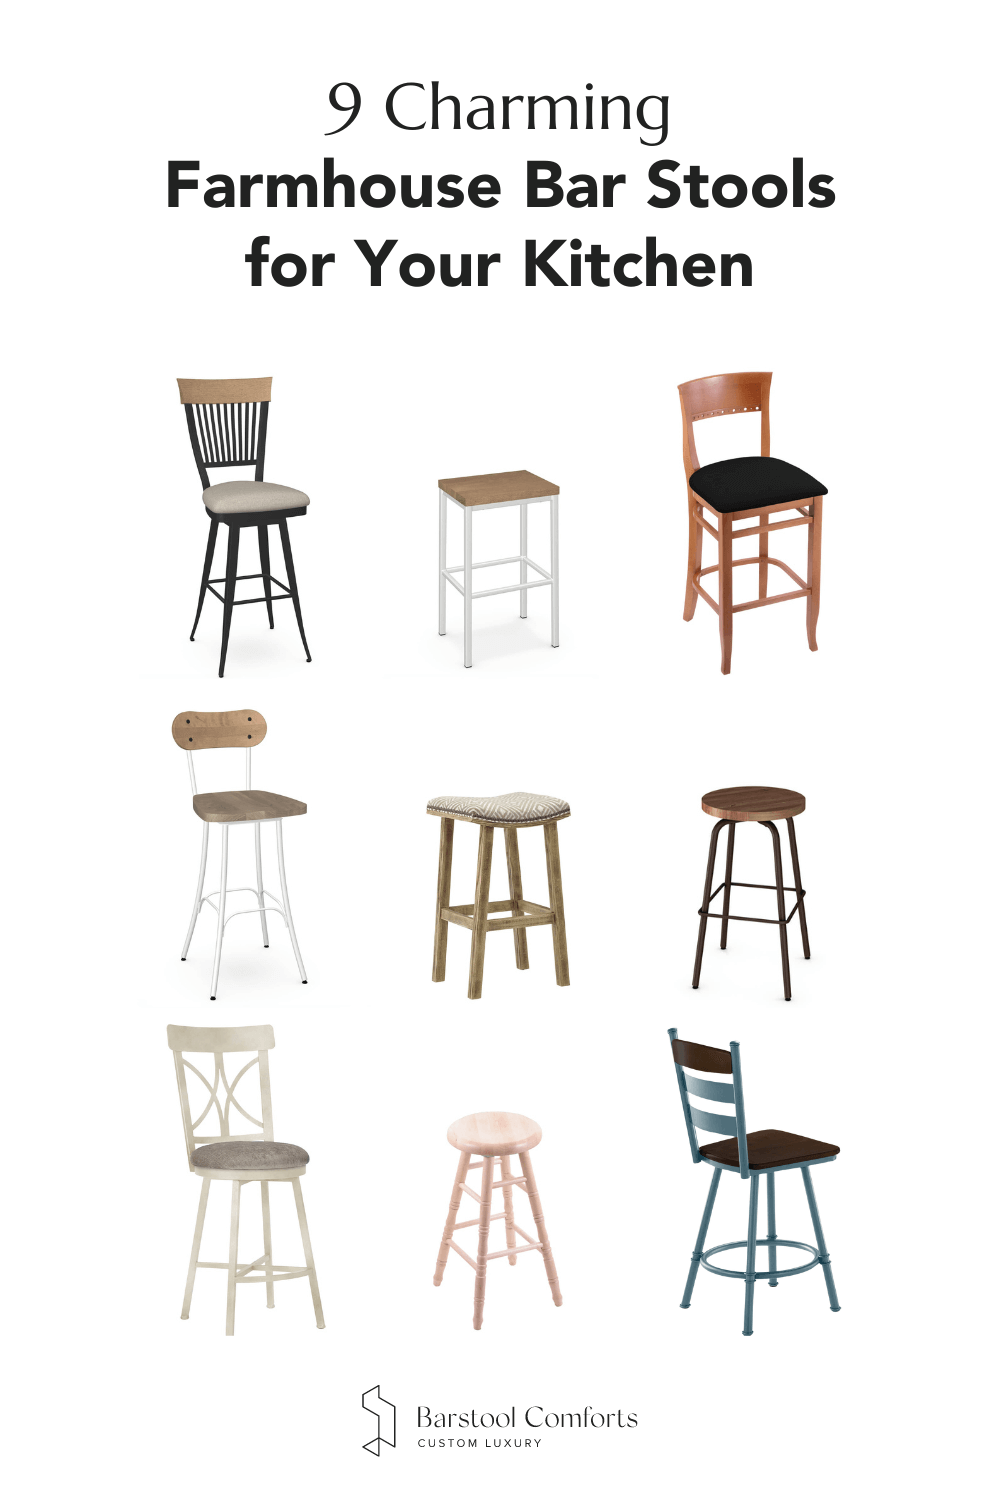 9 Charming Farmhouse Bar Stools for Your Kitchen